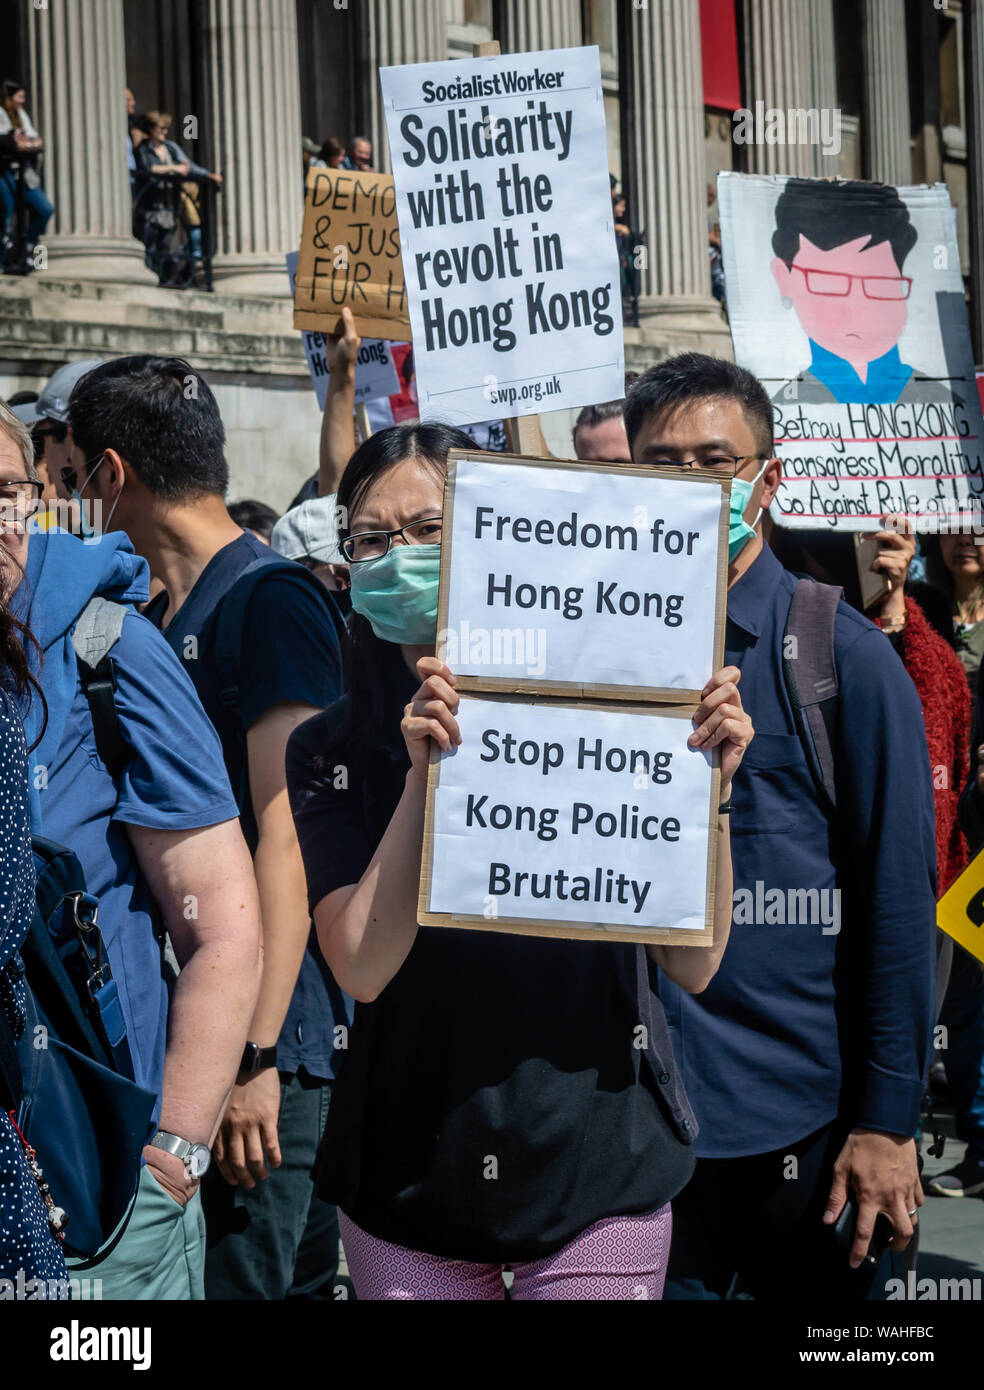 A female protester holding banners that state 'Freedom for Hong Kong' and 'Stop Hong Kong Police Brutality at the UK Solidarity with Hong Kong Rally. Stock Photo